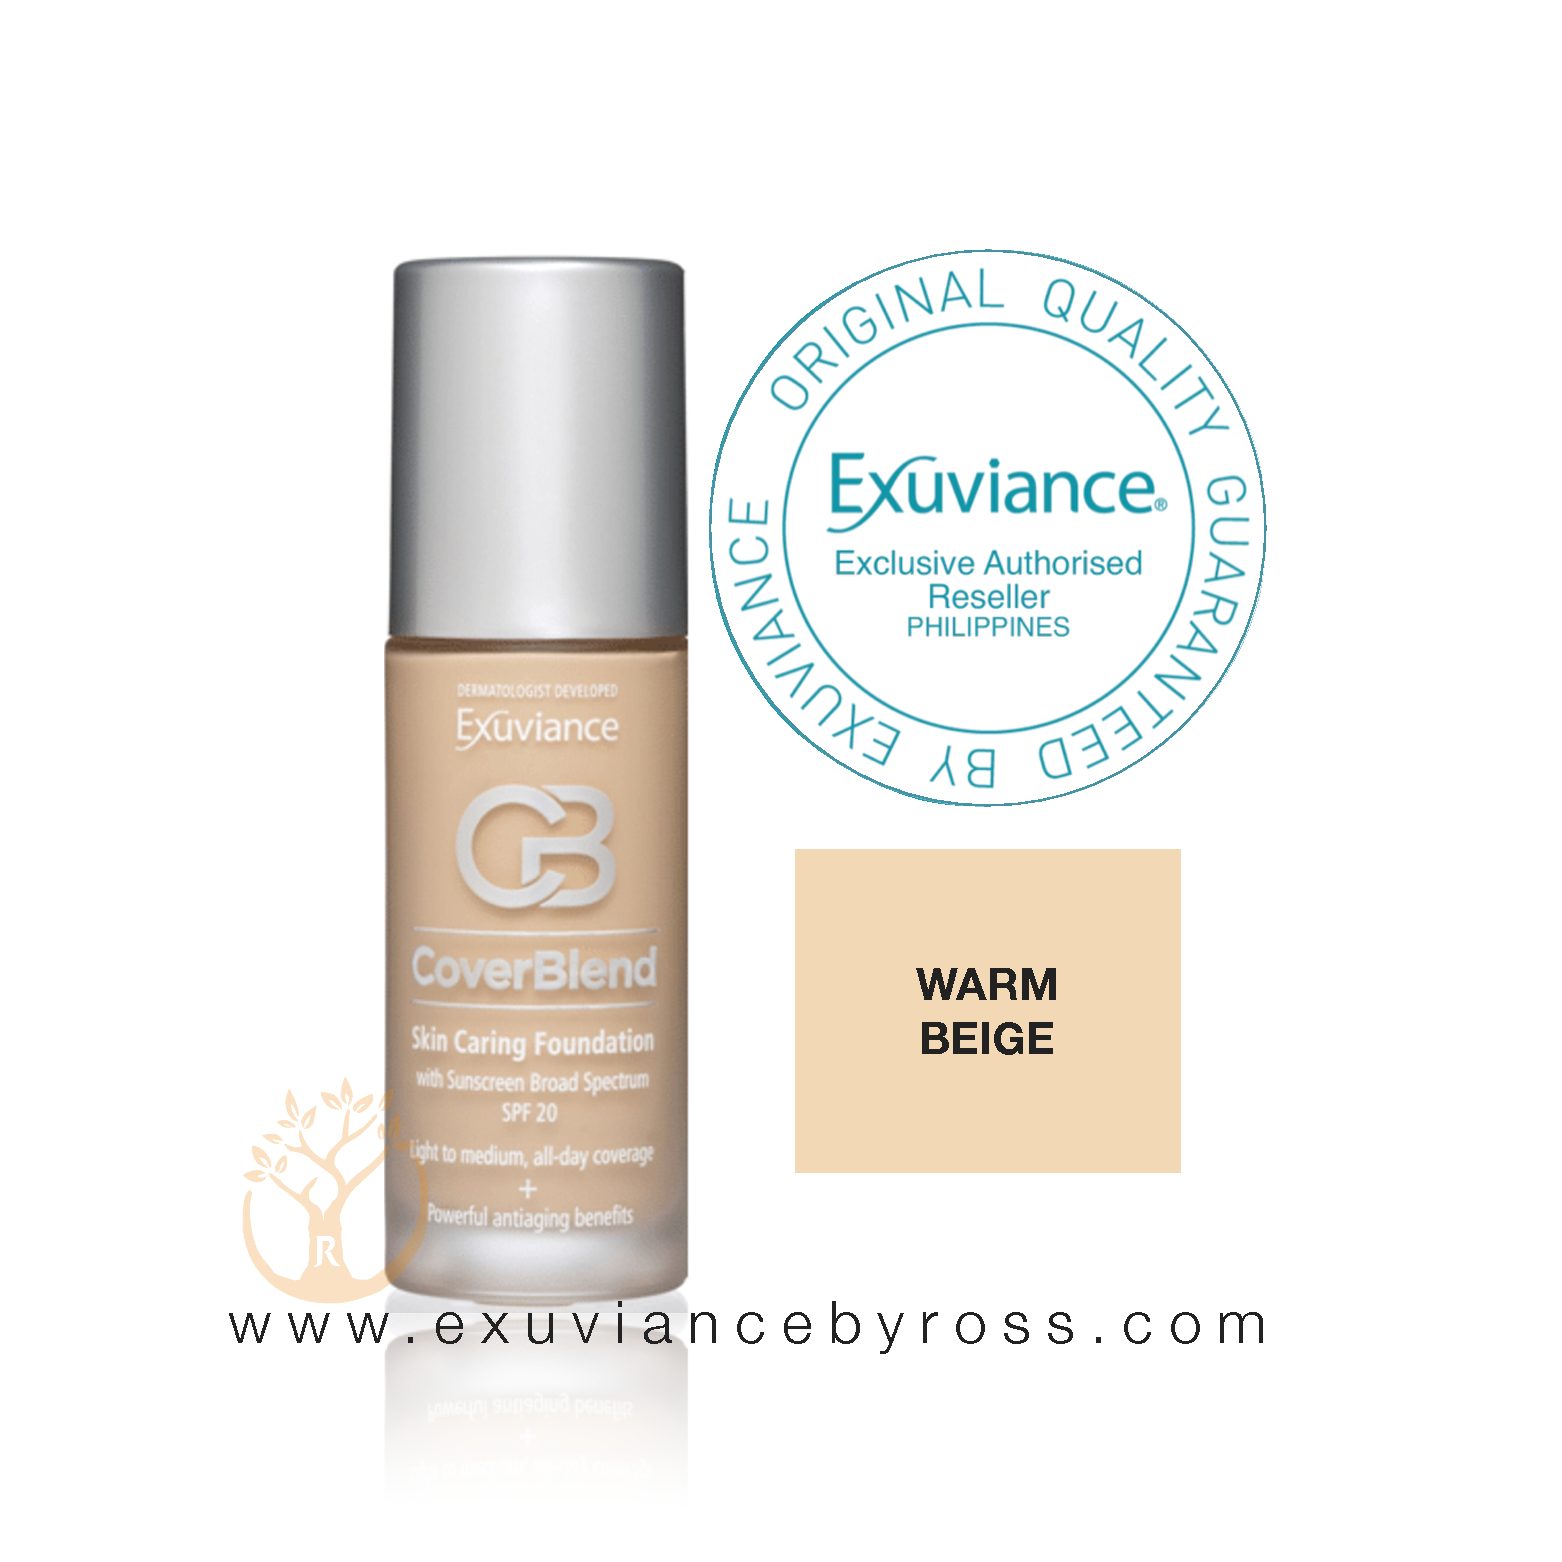 Exuviance CoverBlend Skin Caring Foundation SPF 20 30mL – Warm